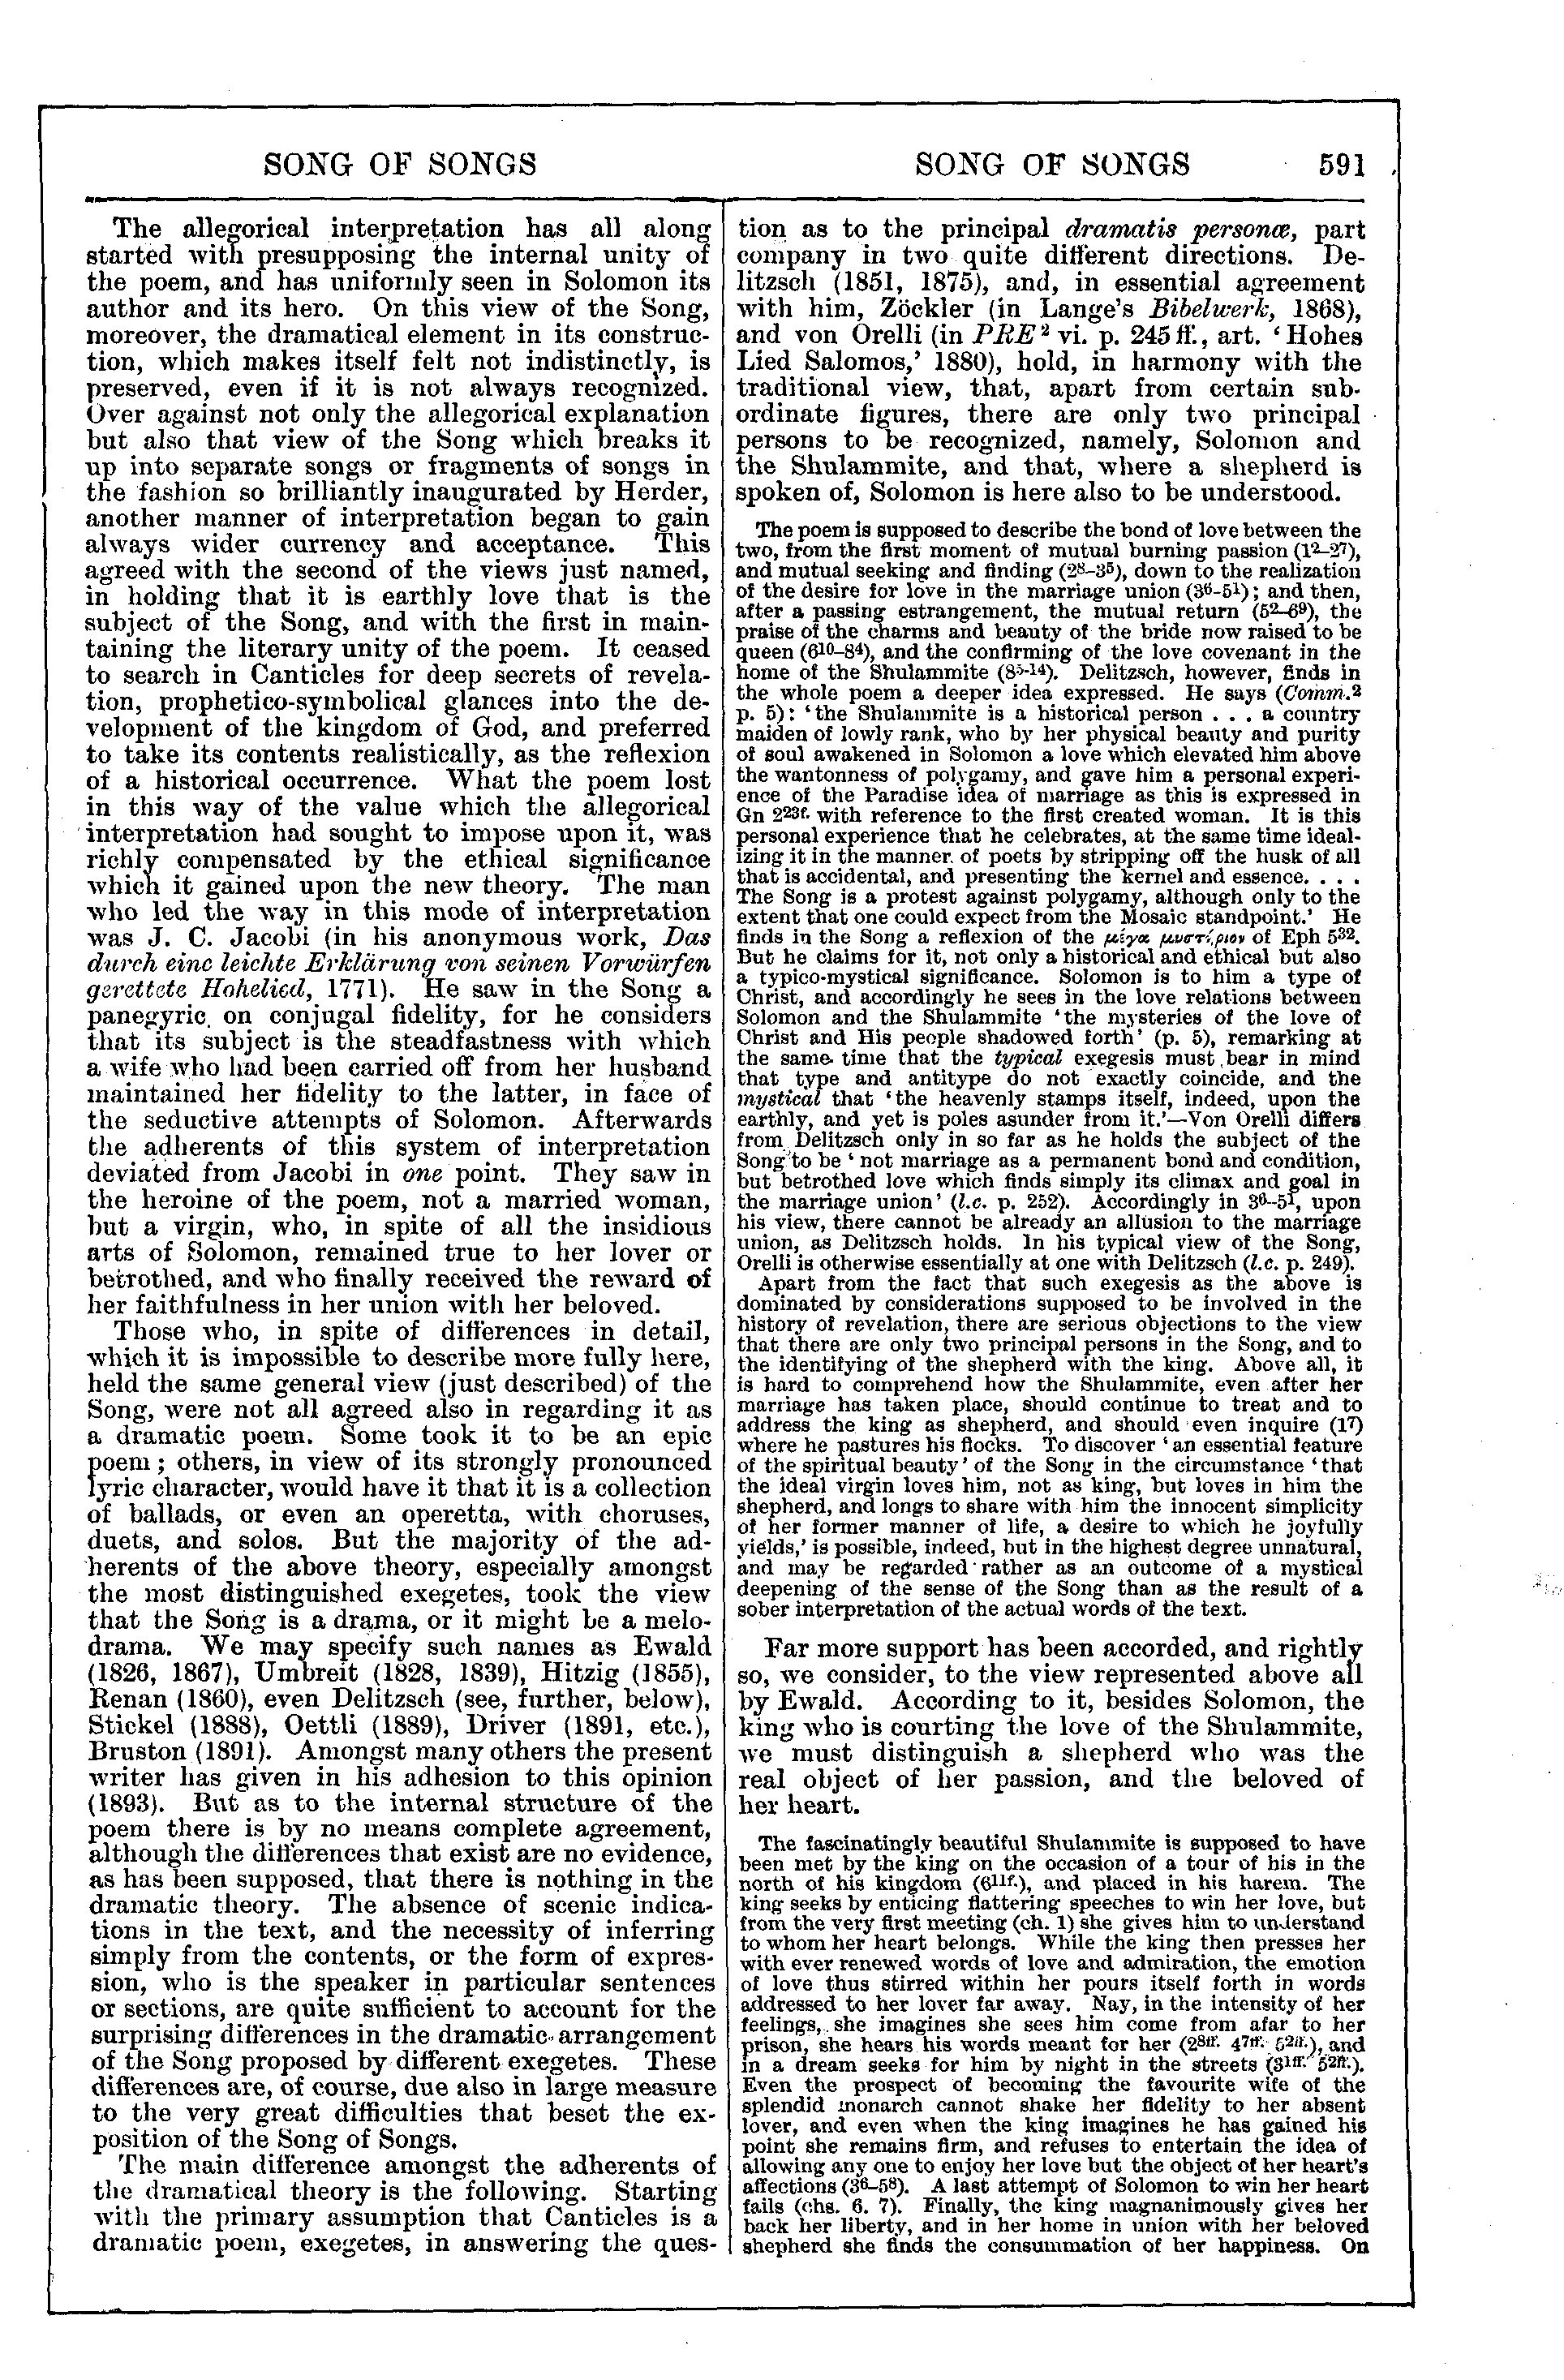 Image of page 591